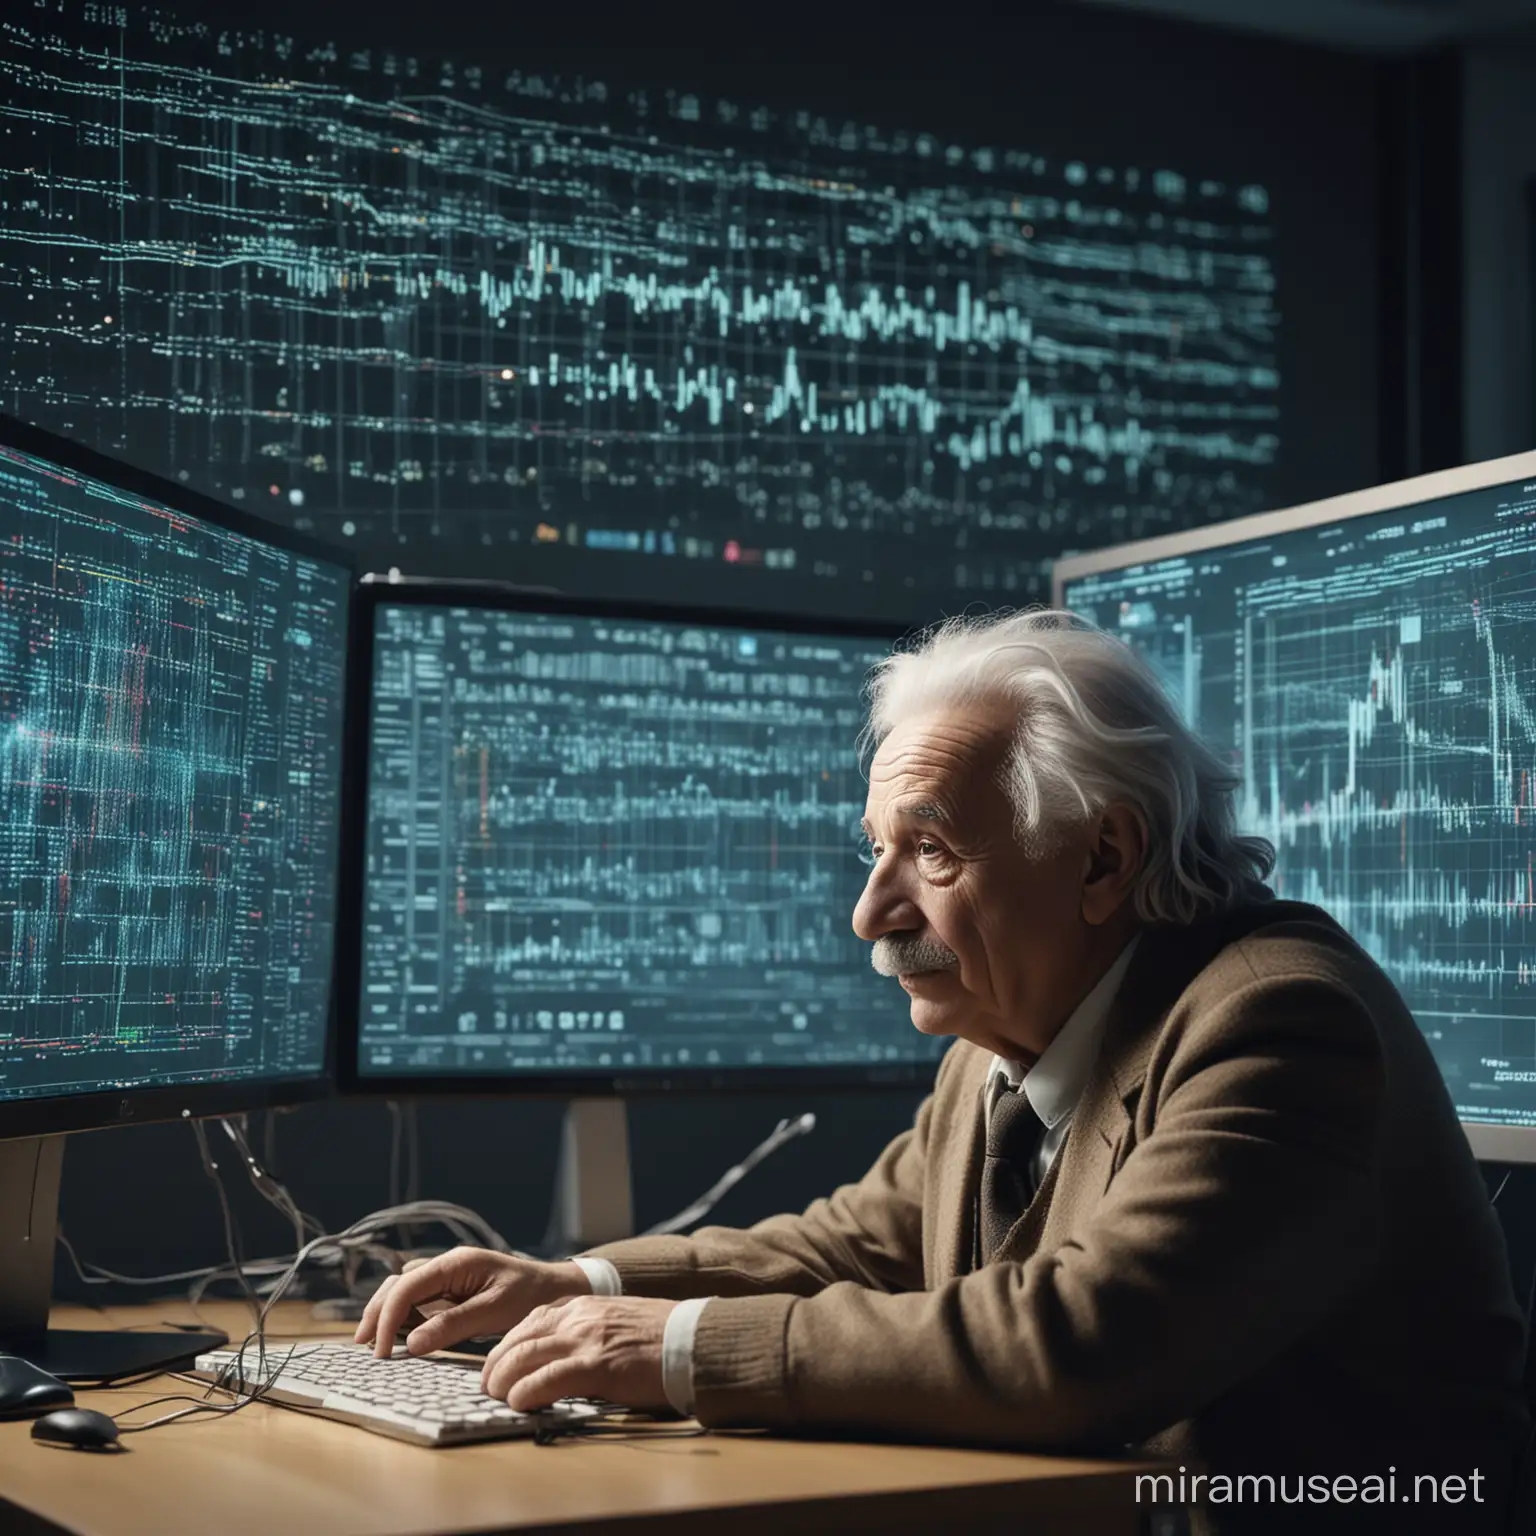 Albert Einstein as programmer looking at a digital monitor in the air where a code is being projected, surrounded by monitors displaying lines of code and data visualizations, Photography, realistic style, Colorful, more technologies